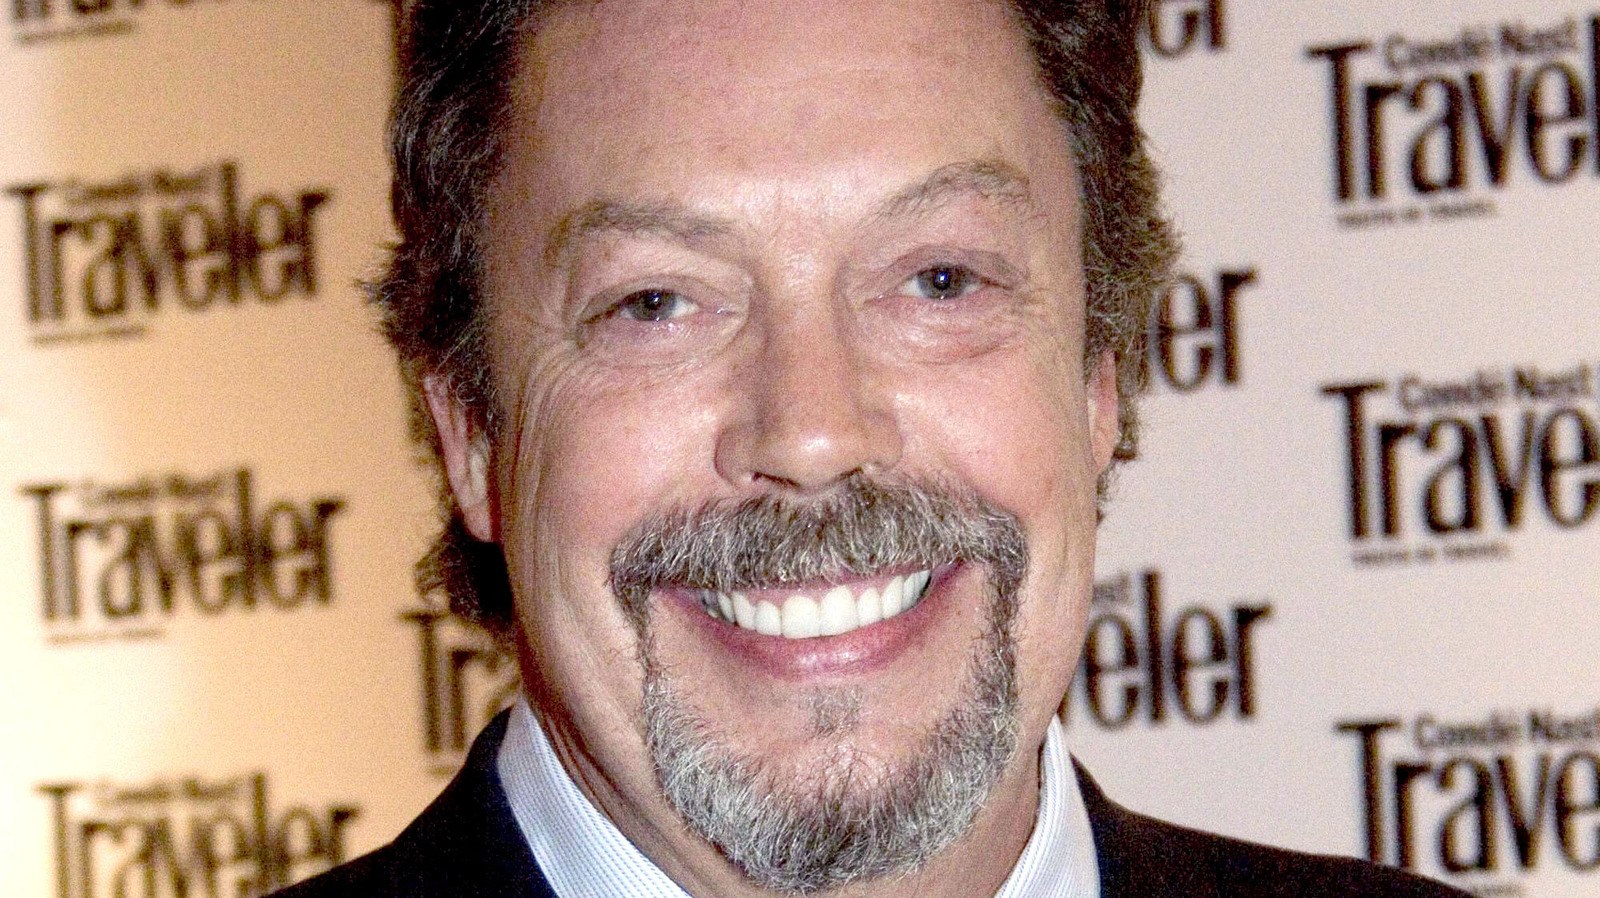 Dinkarville Humoristisk Ombord The Cartoon Characters You Never Realized Were Voiced By Tim Curry